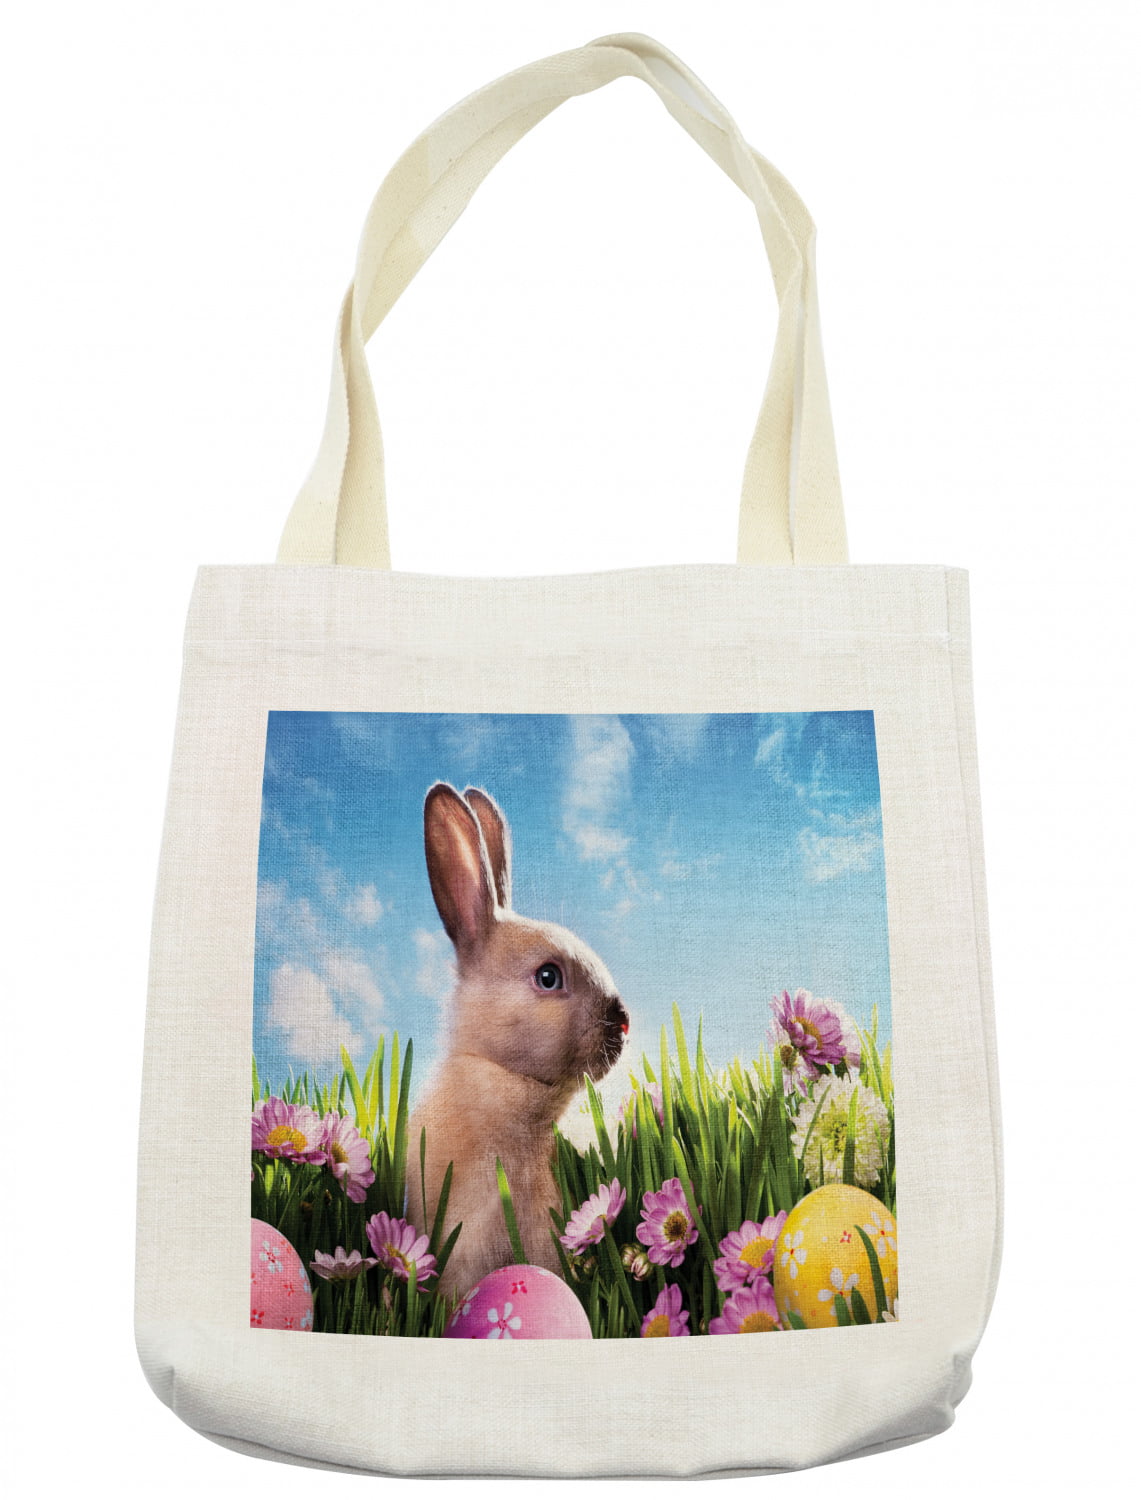 12x15-10 Easter canvas messenger bag Blossoming Flowers with Colorful Painted Eggs and Fluffy Bunny Nature Photography canvas beach bag Multicolor